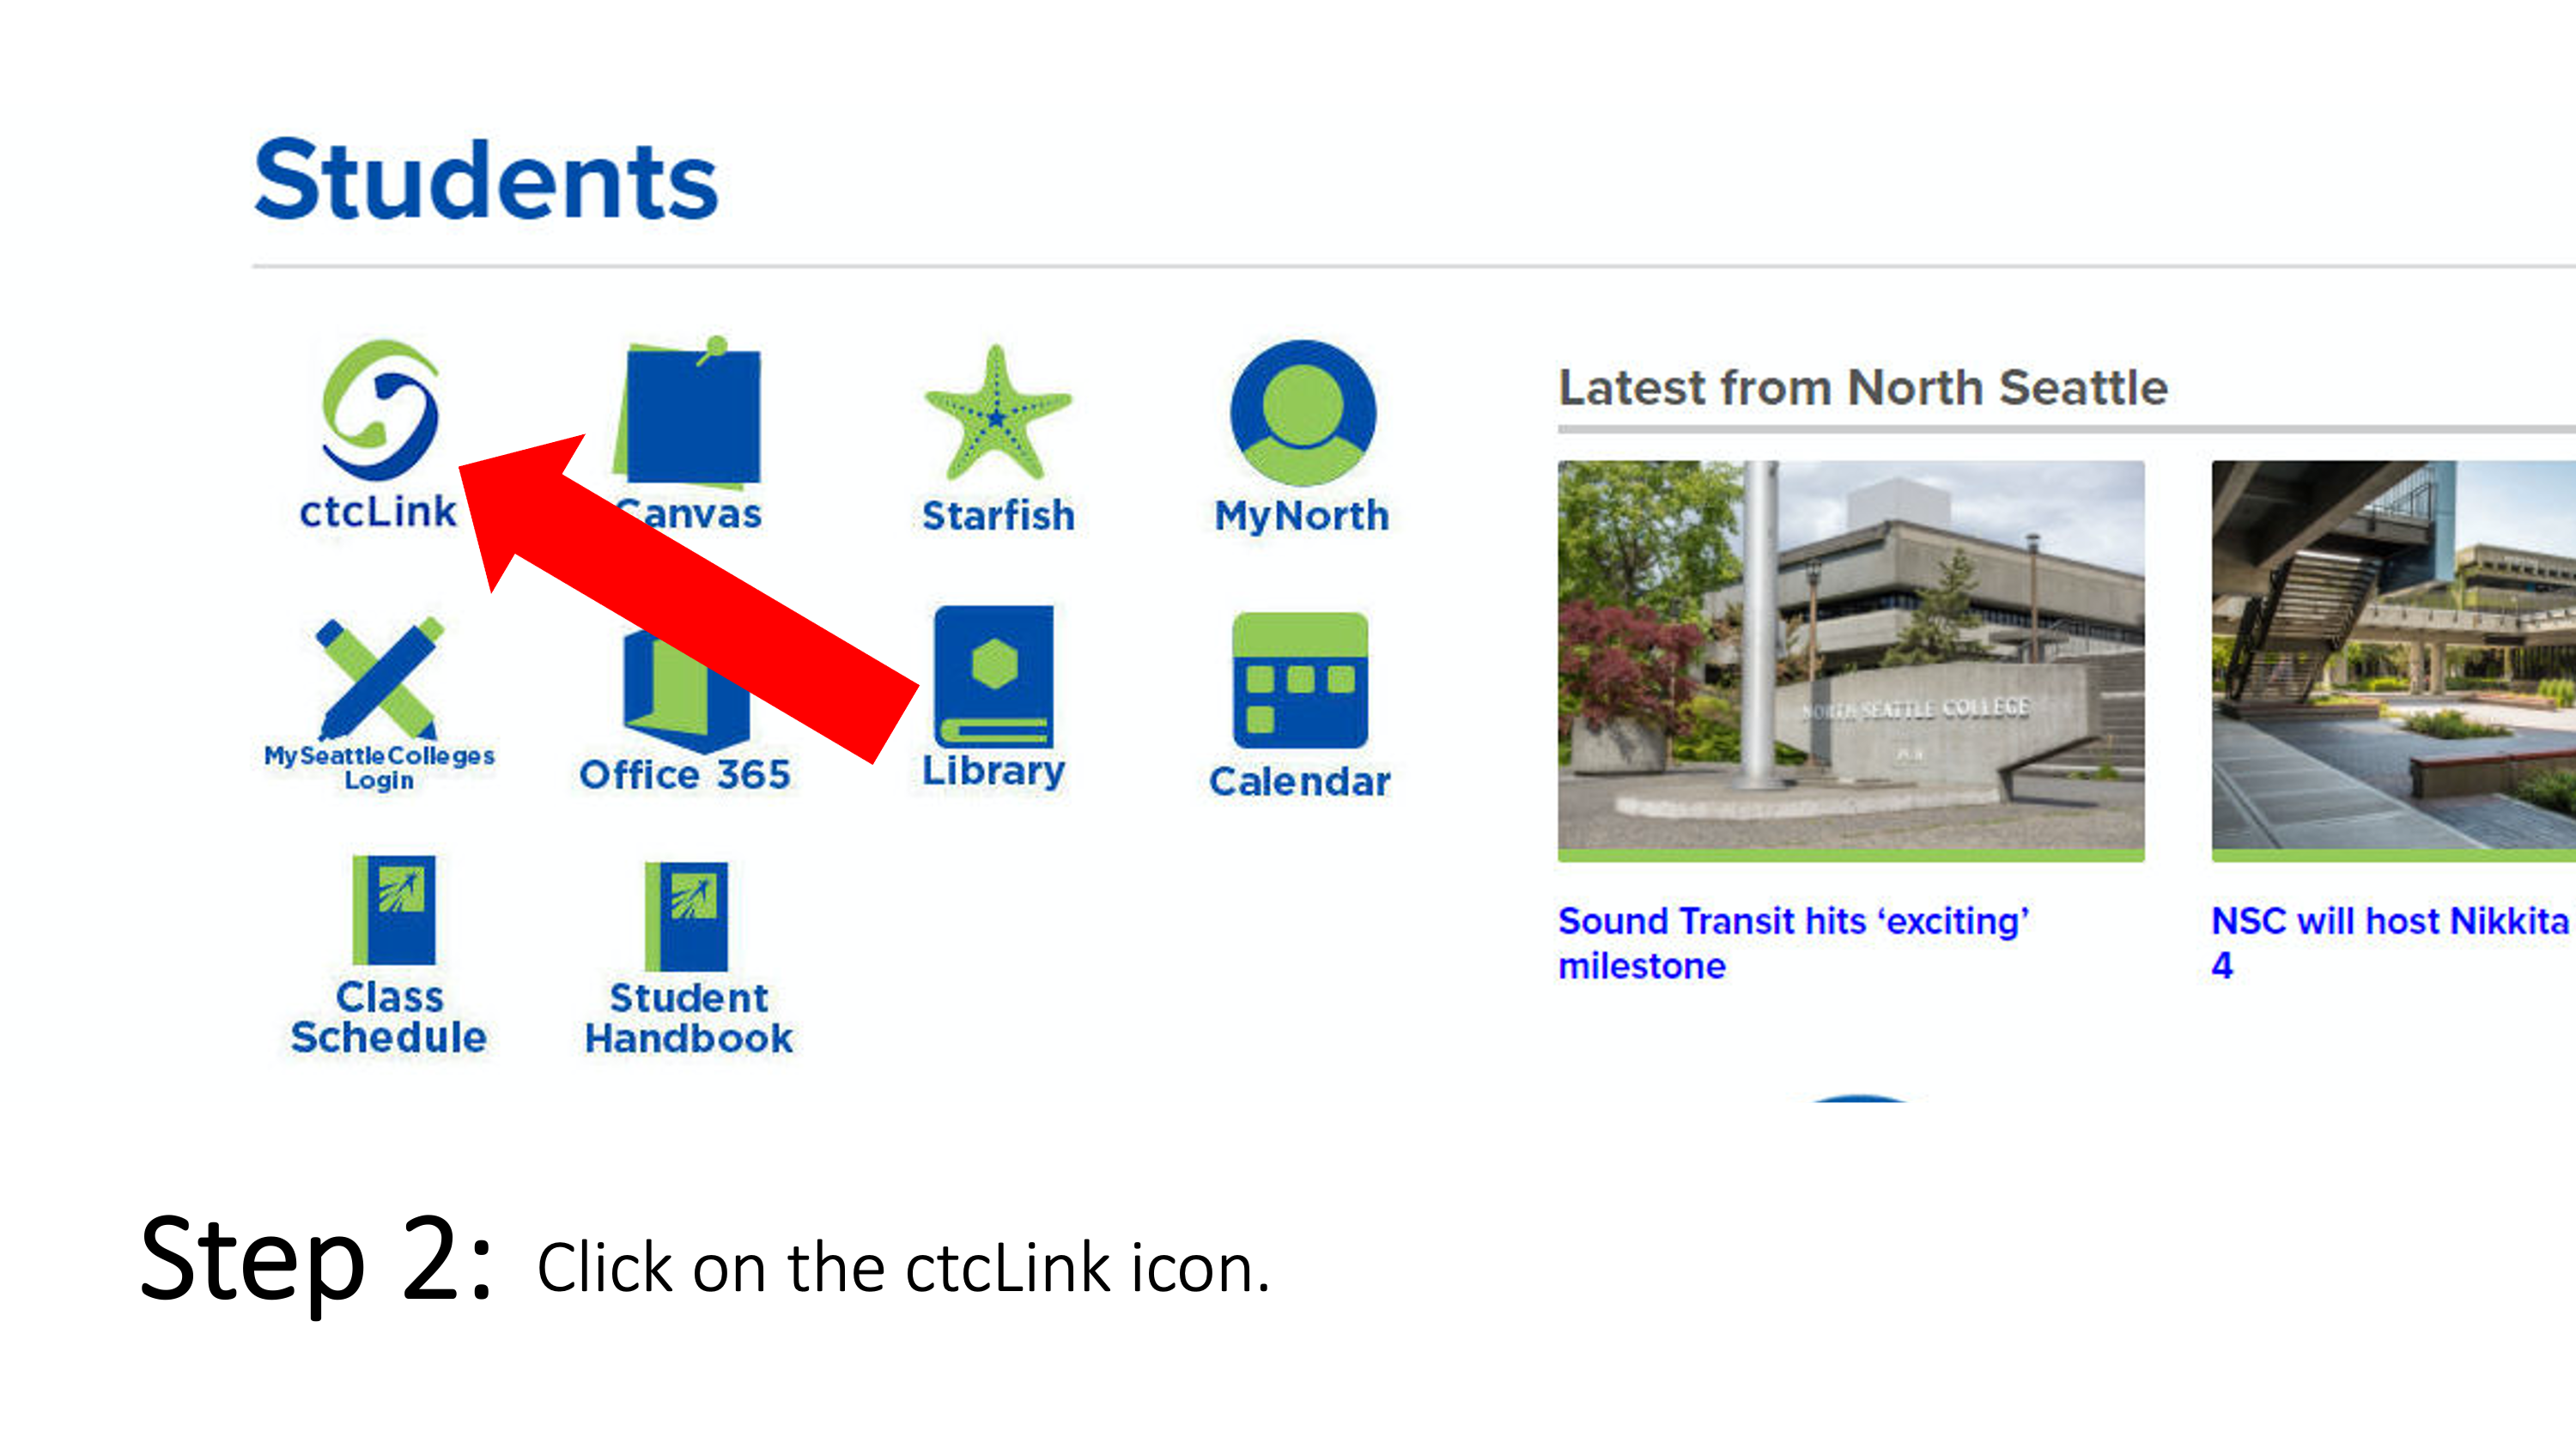 Step 2: Click on the ctcLink icon on the Students page.